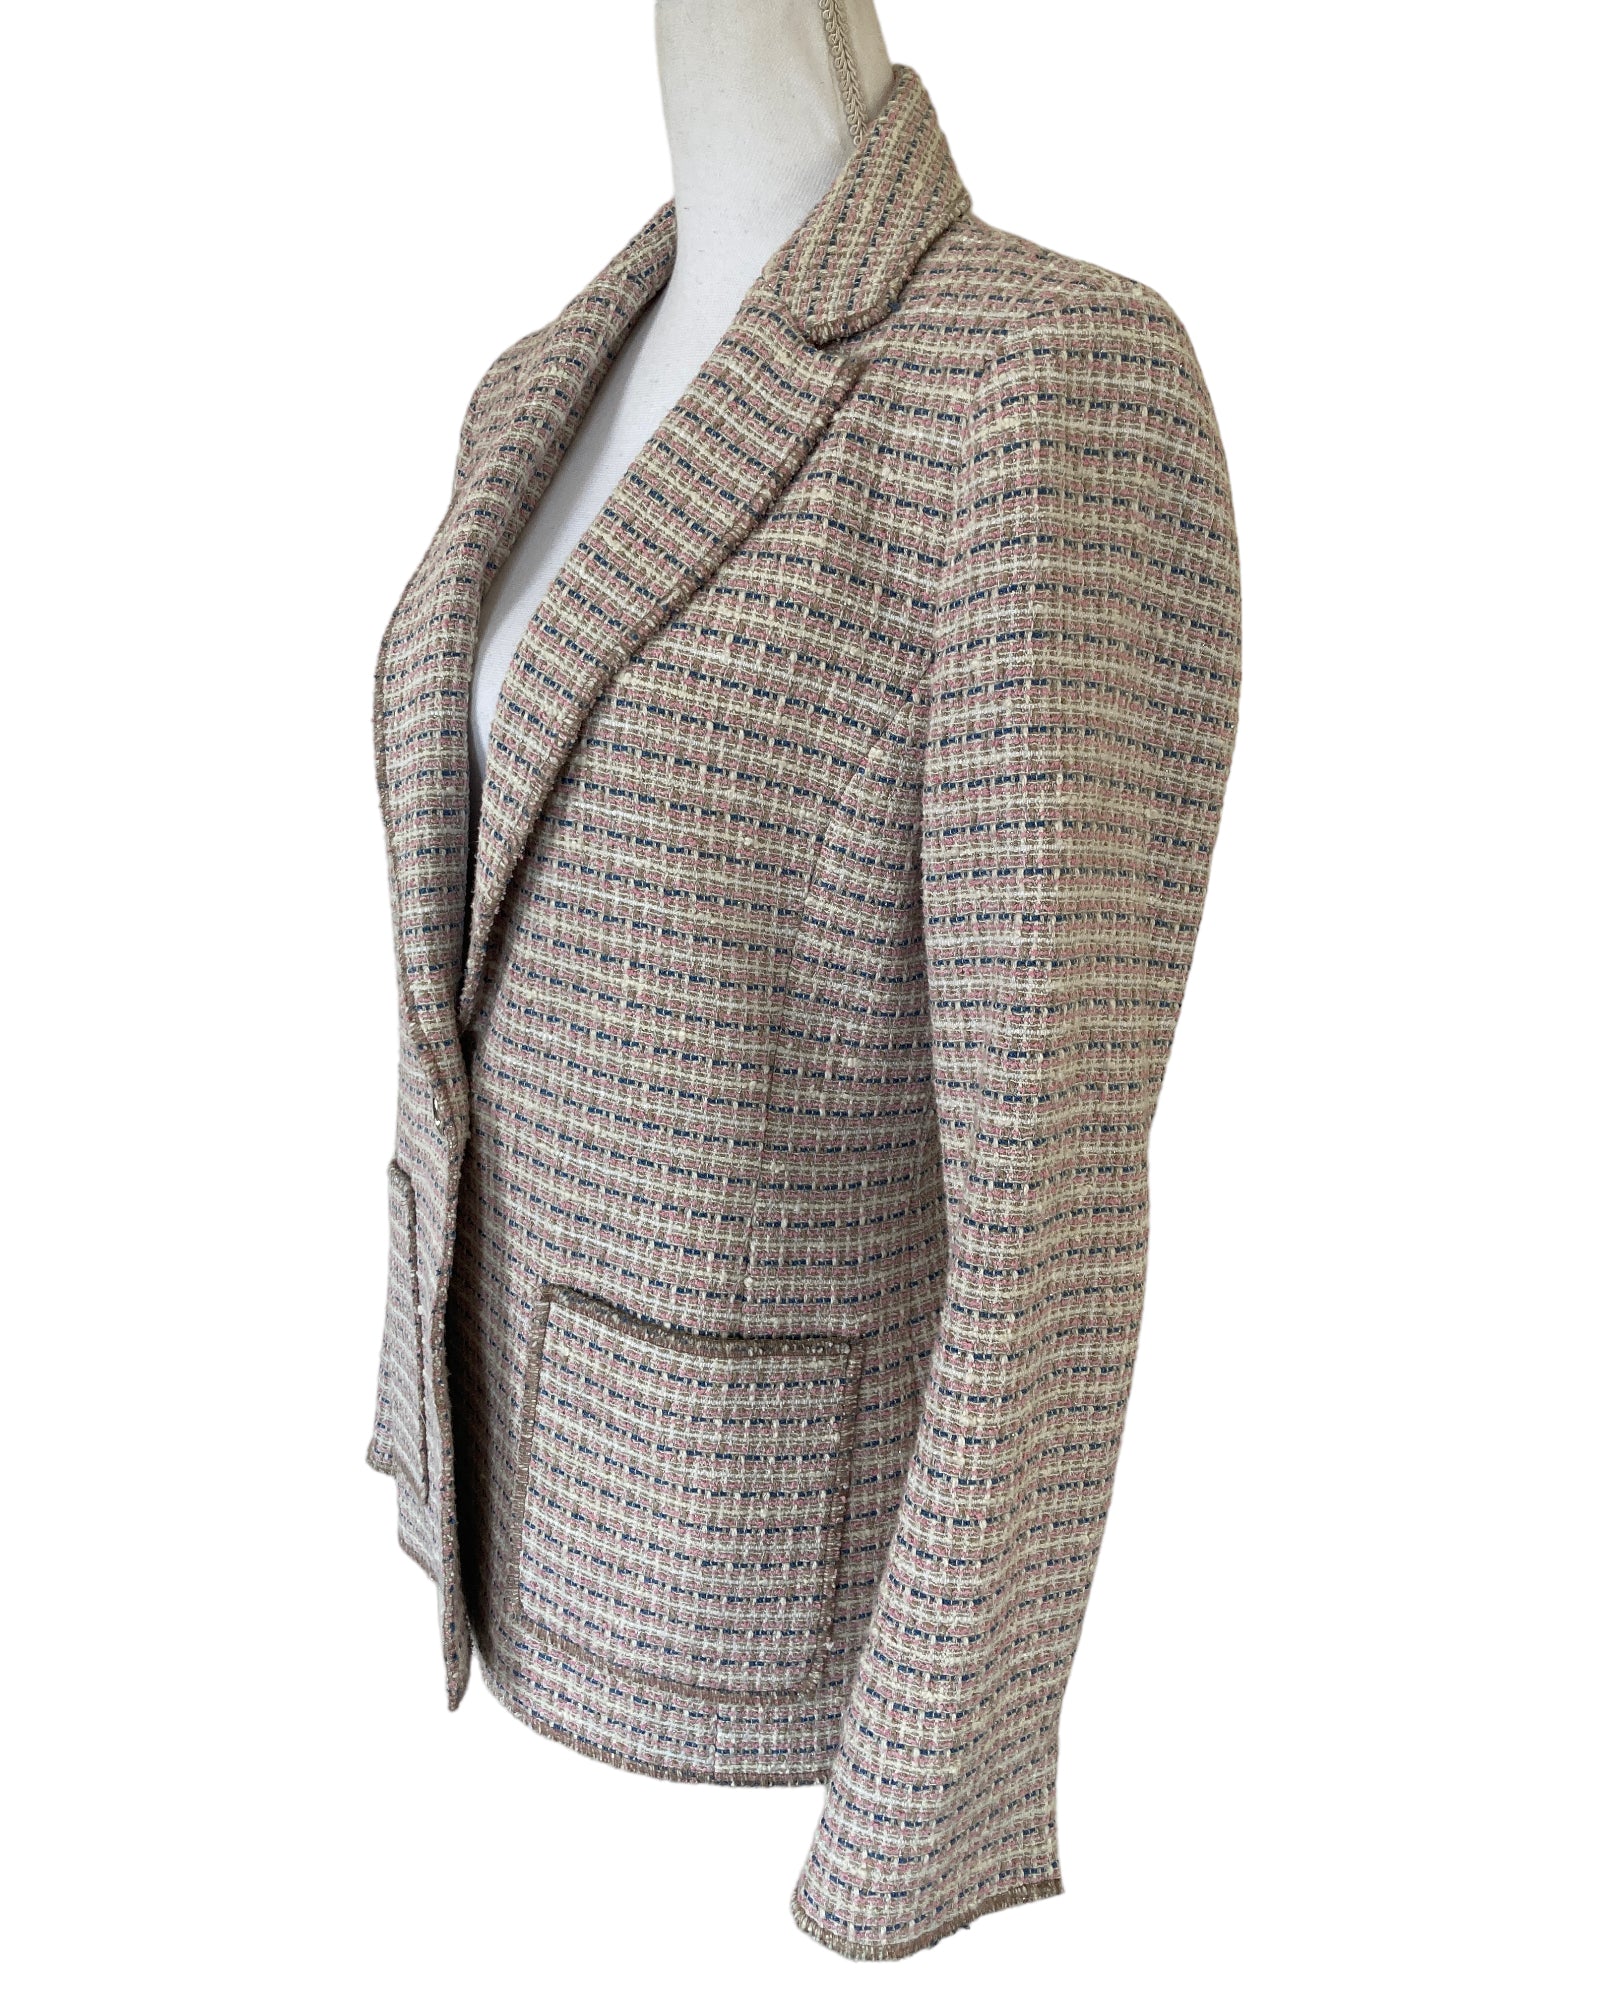 Worth Pink, Blue, Taupe and Ivory Tweed Blazer, 6